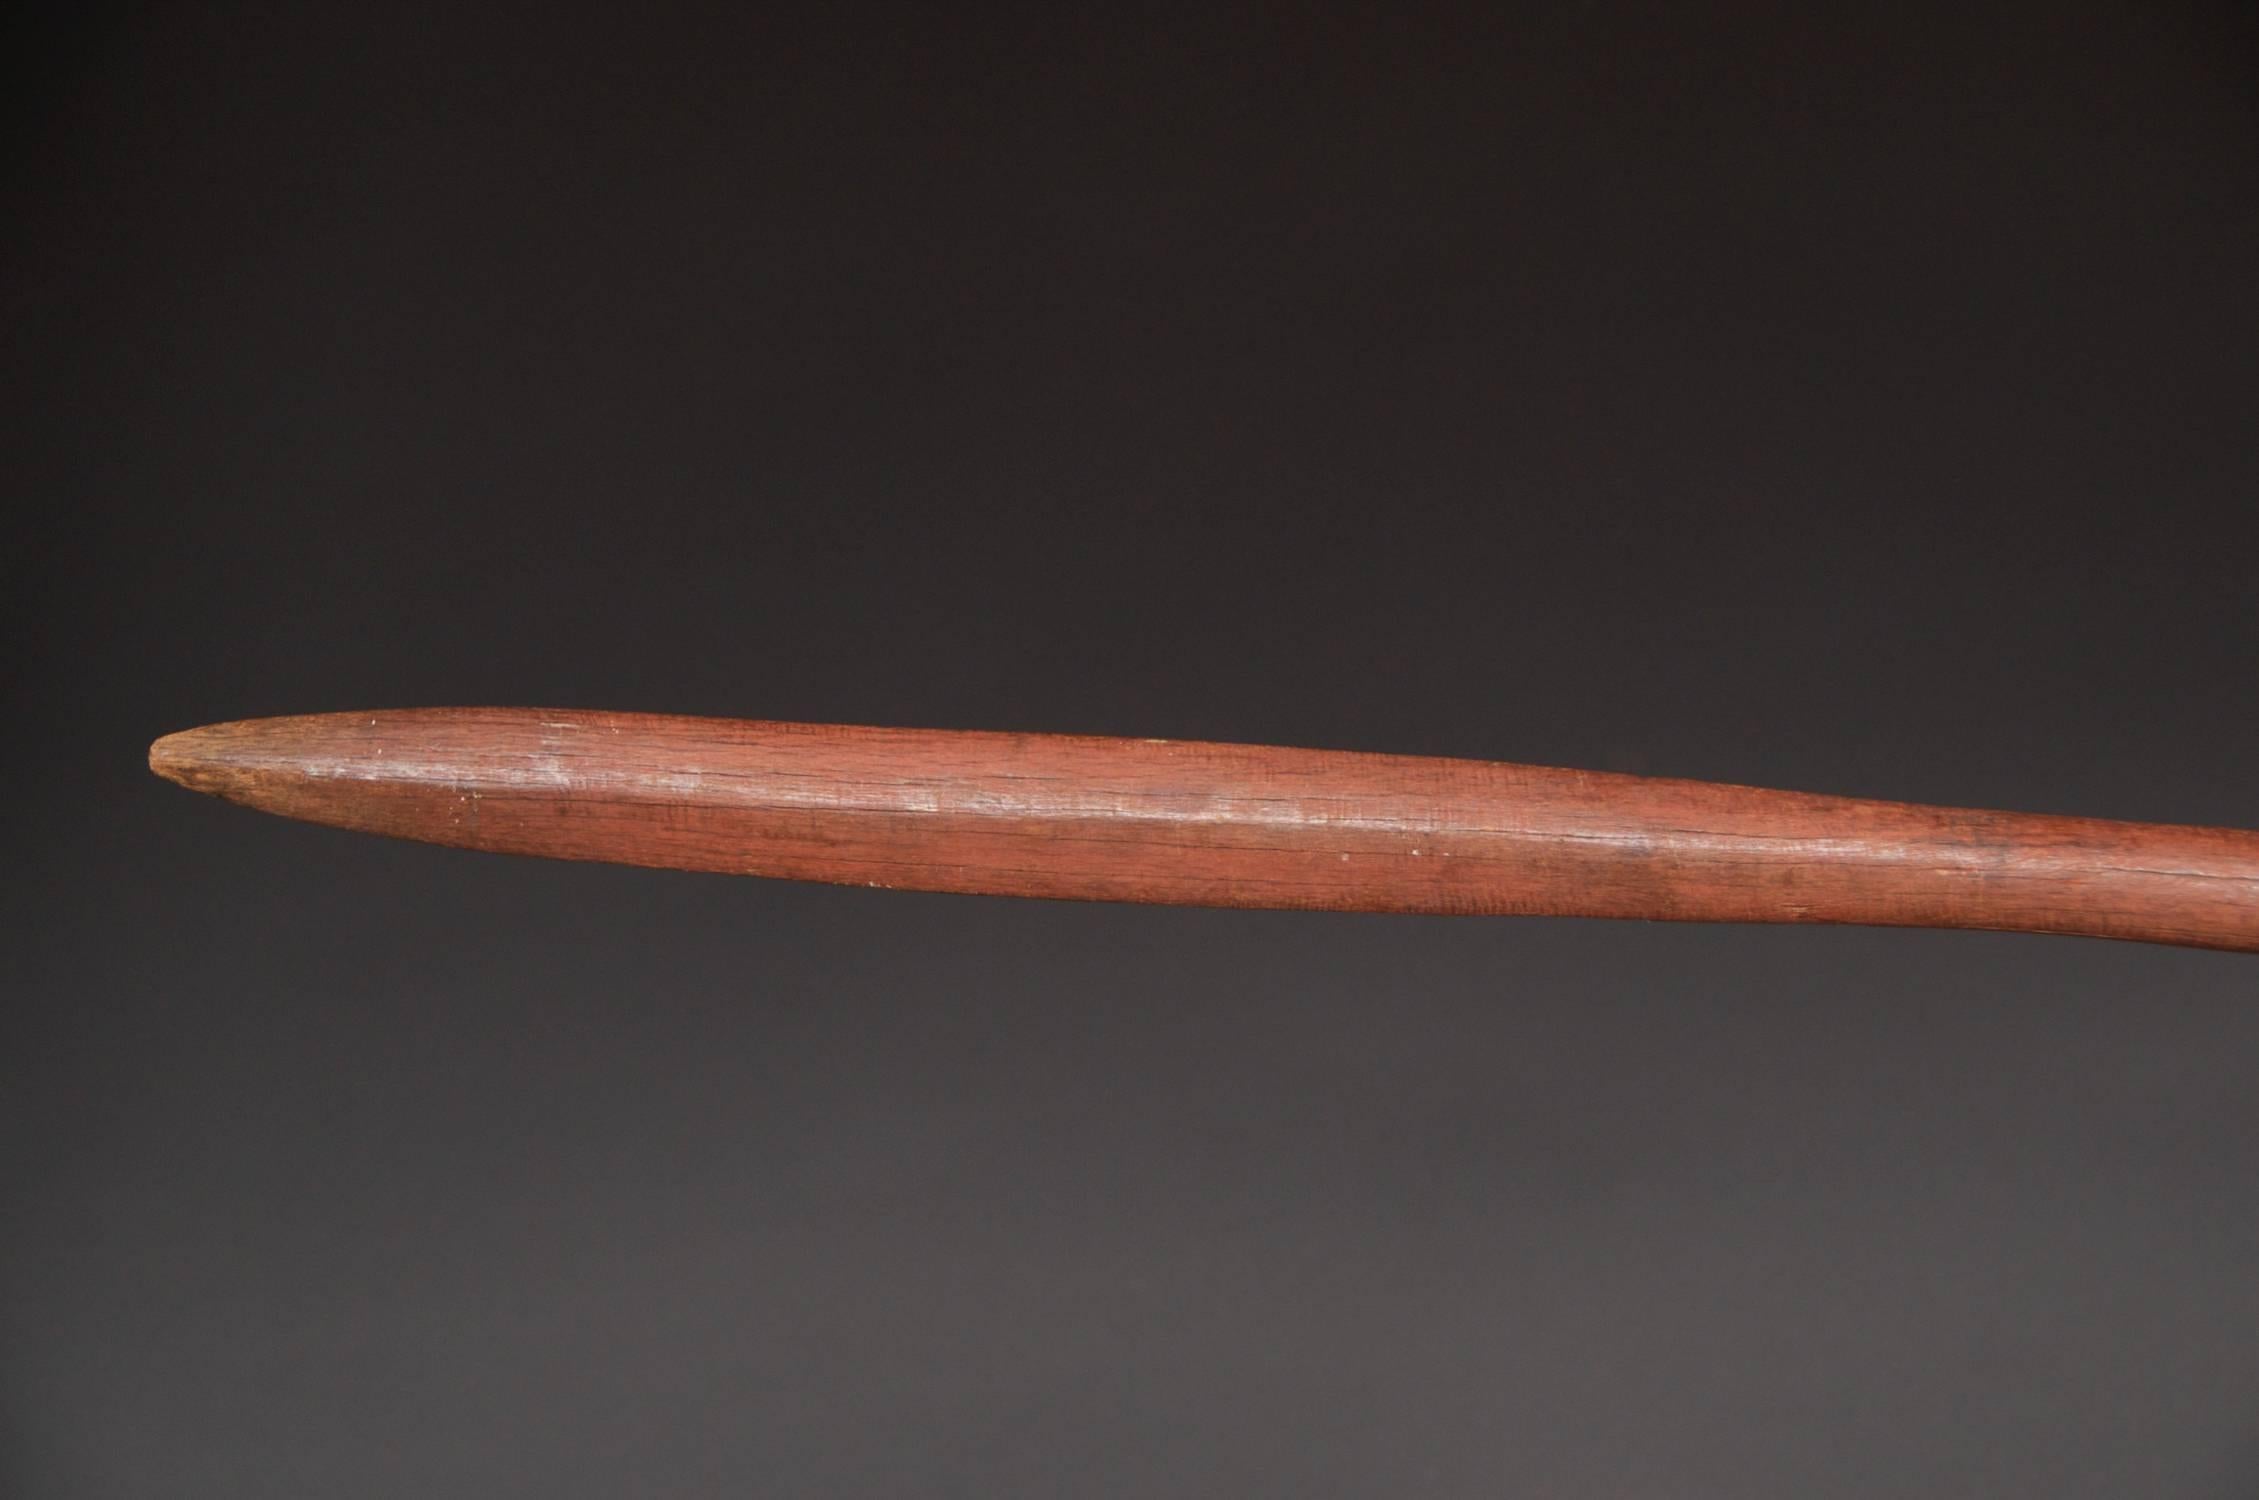 Region / Tribe: Prairie - Northern Plains / Pawnee (?)

circa Mid-19th century (earlier)

Material: Osage orange, red and black pigment

Dimension: L 57 ½” x W (of front “blade”) 1 ¾” x W (of back carved swallow tail) 1 ¾”

Condition: